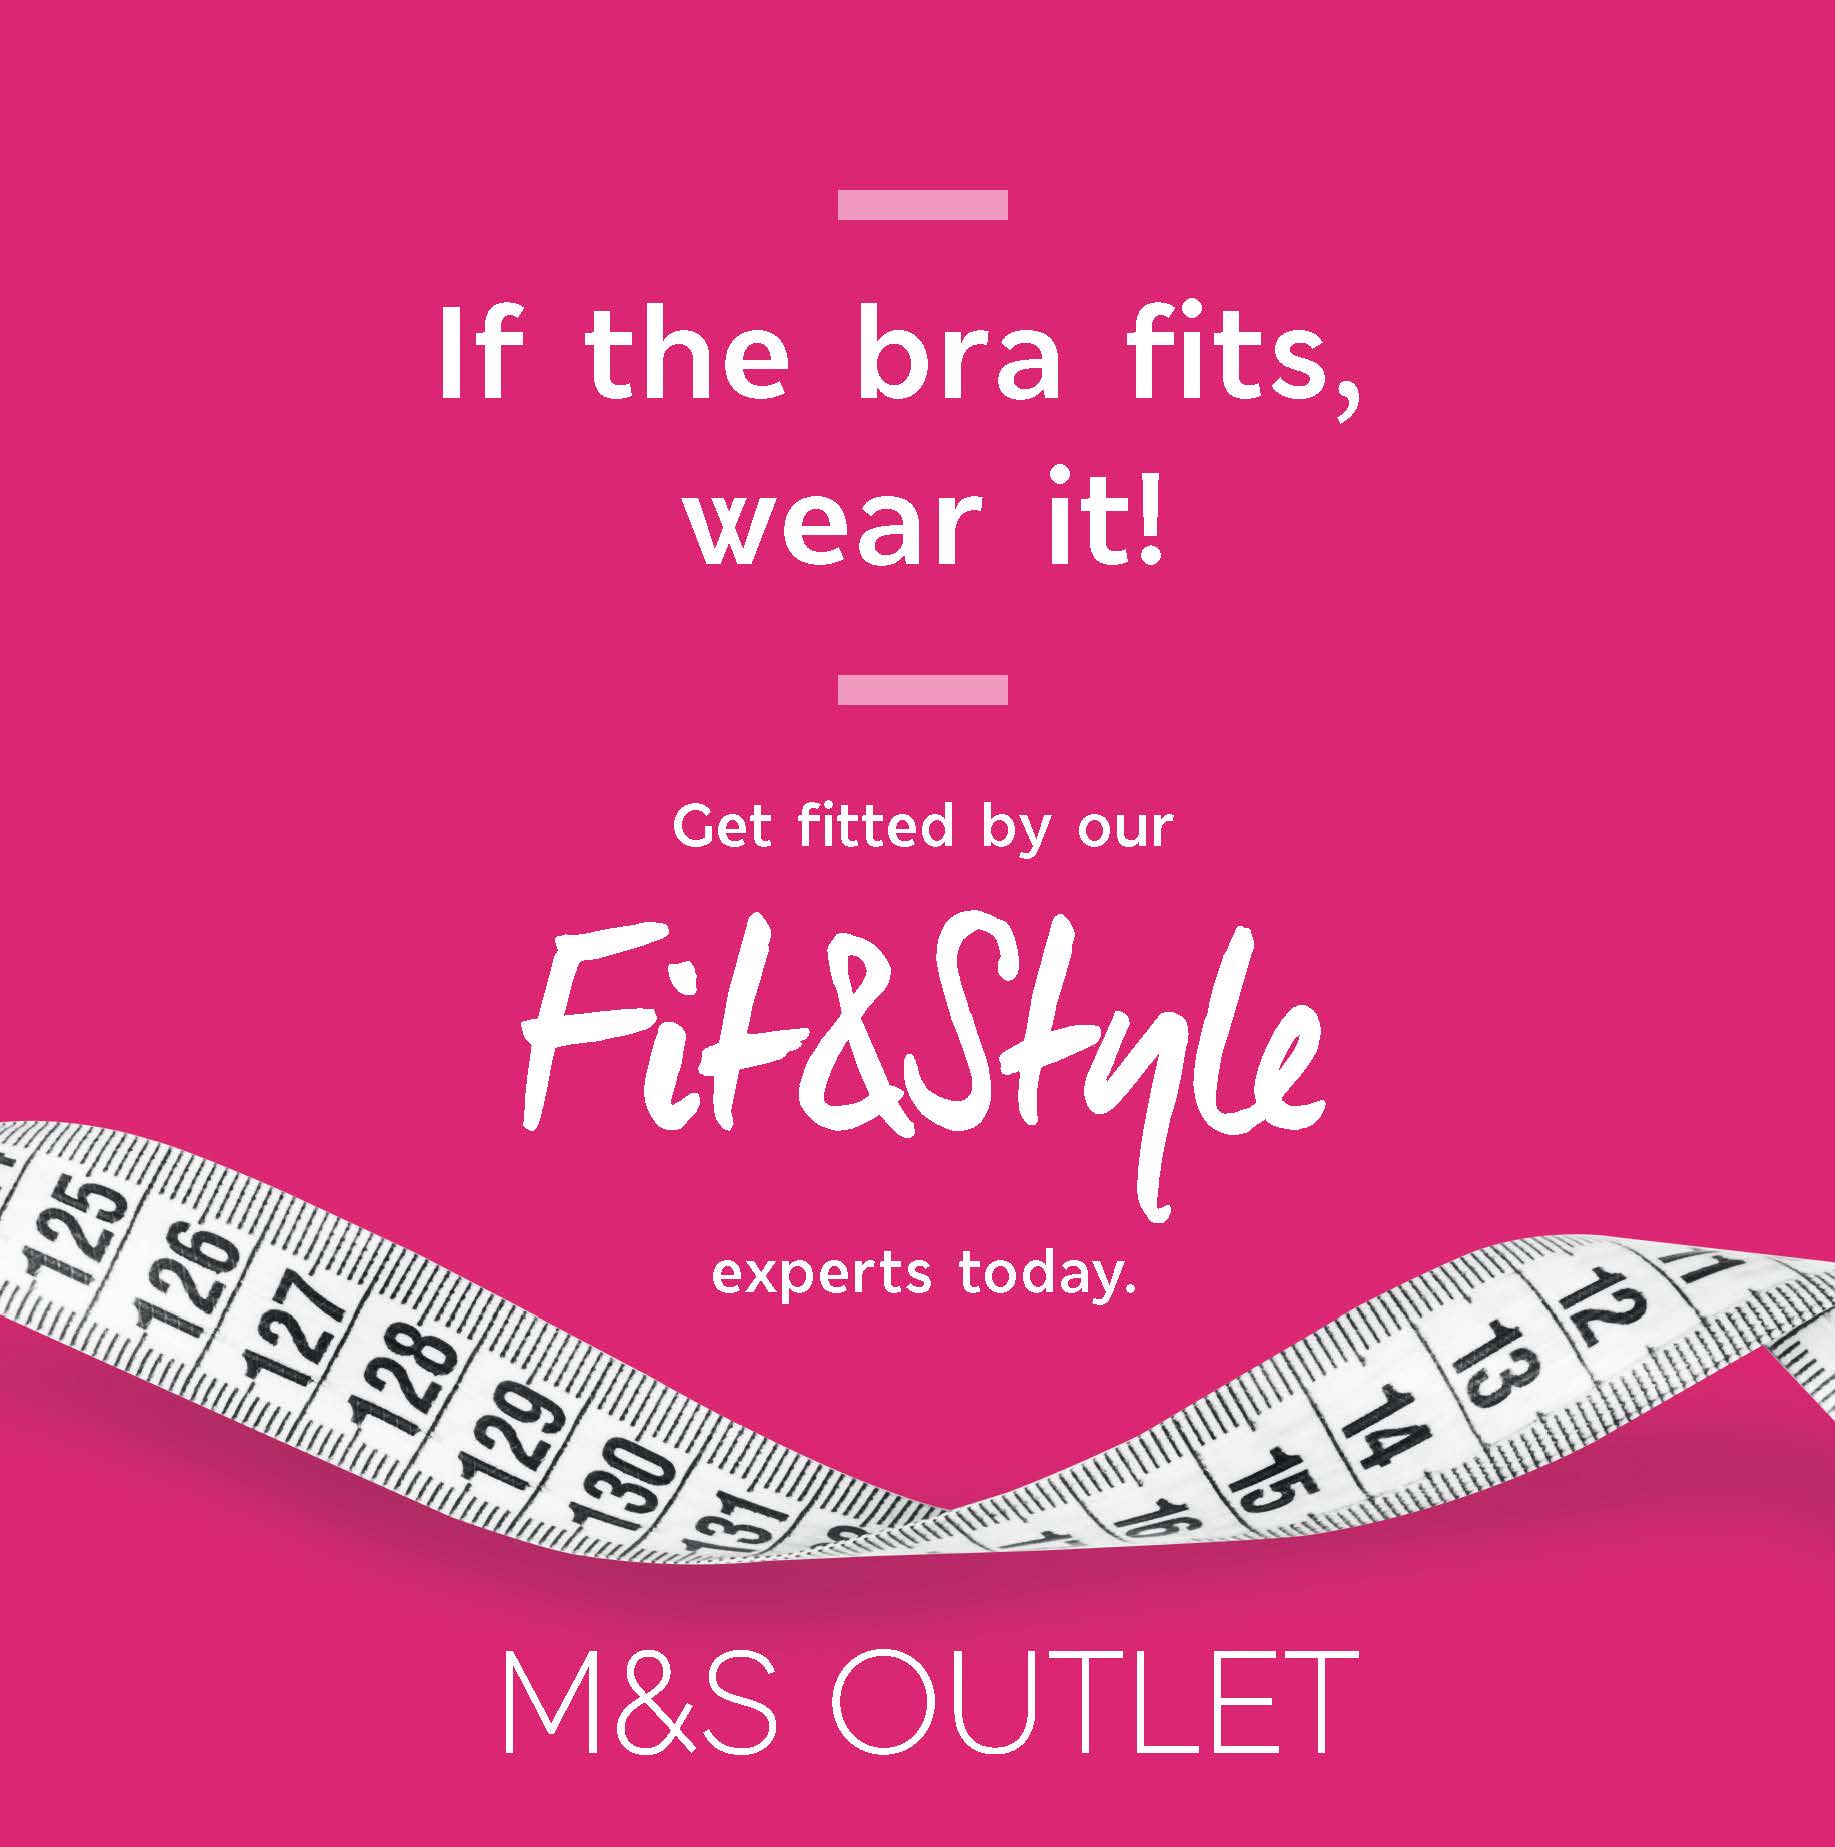 The Bra Fit Campaign with M&S Outlet – West Bromwich Business Improvement  District